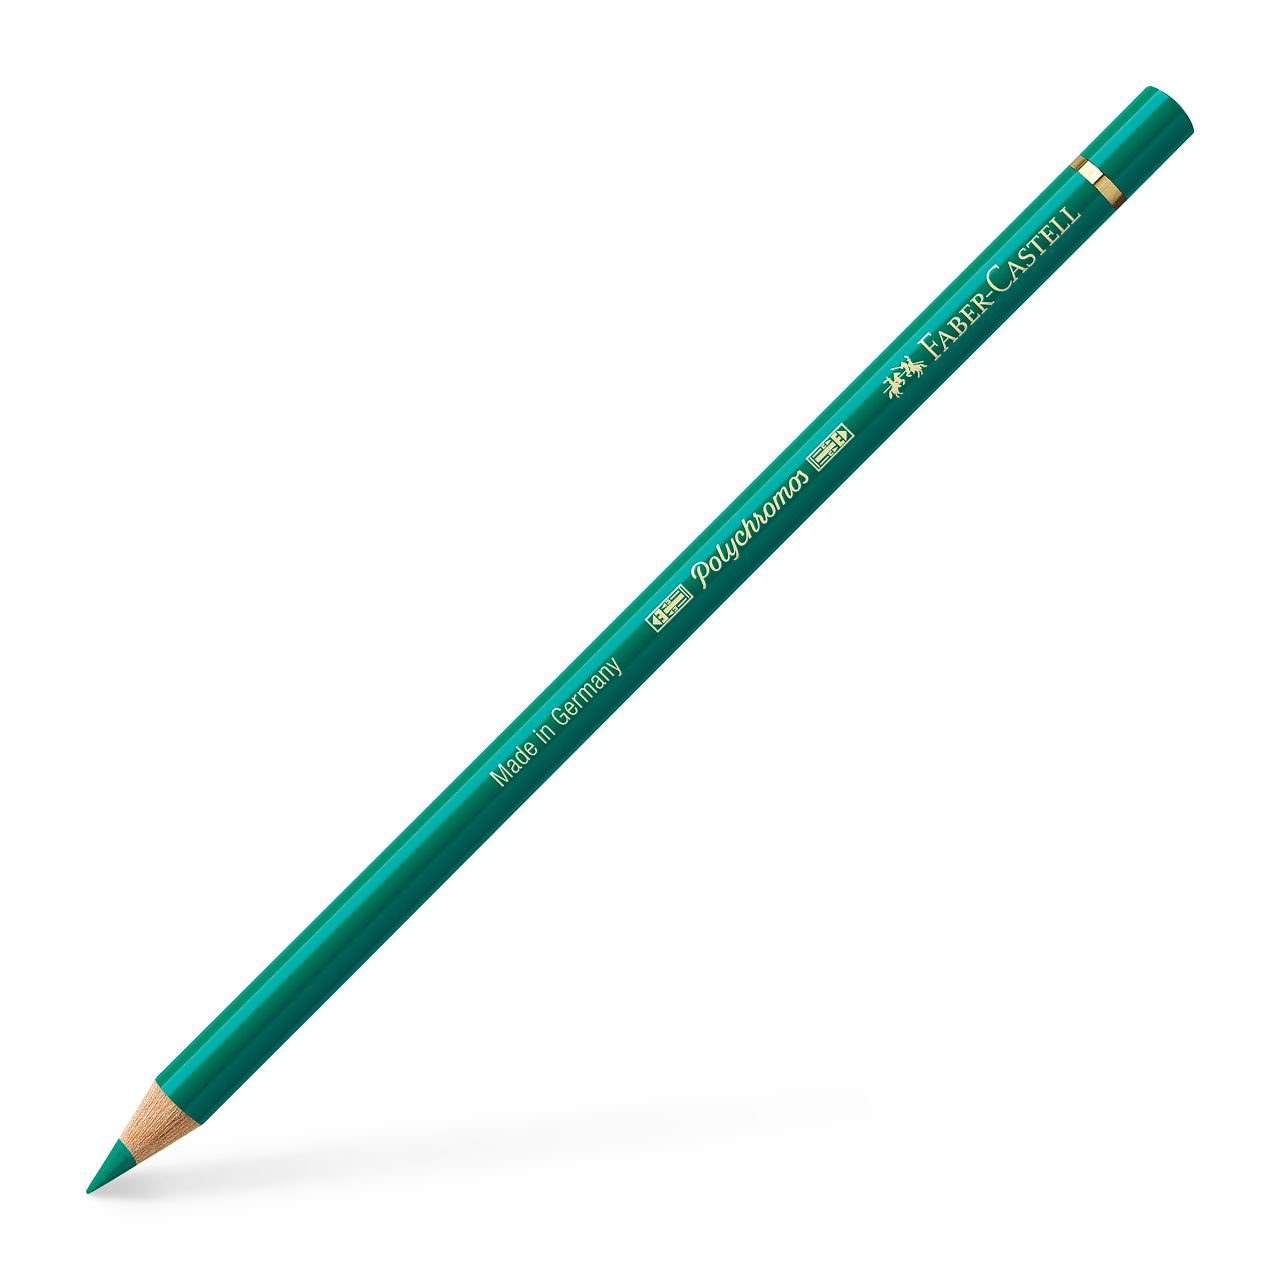 Faber-Castell - Polychromos colour pencil, 161 phthalo green